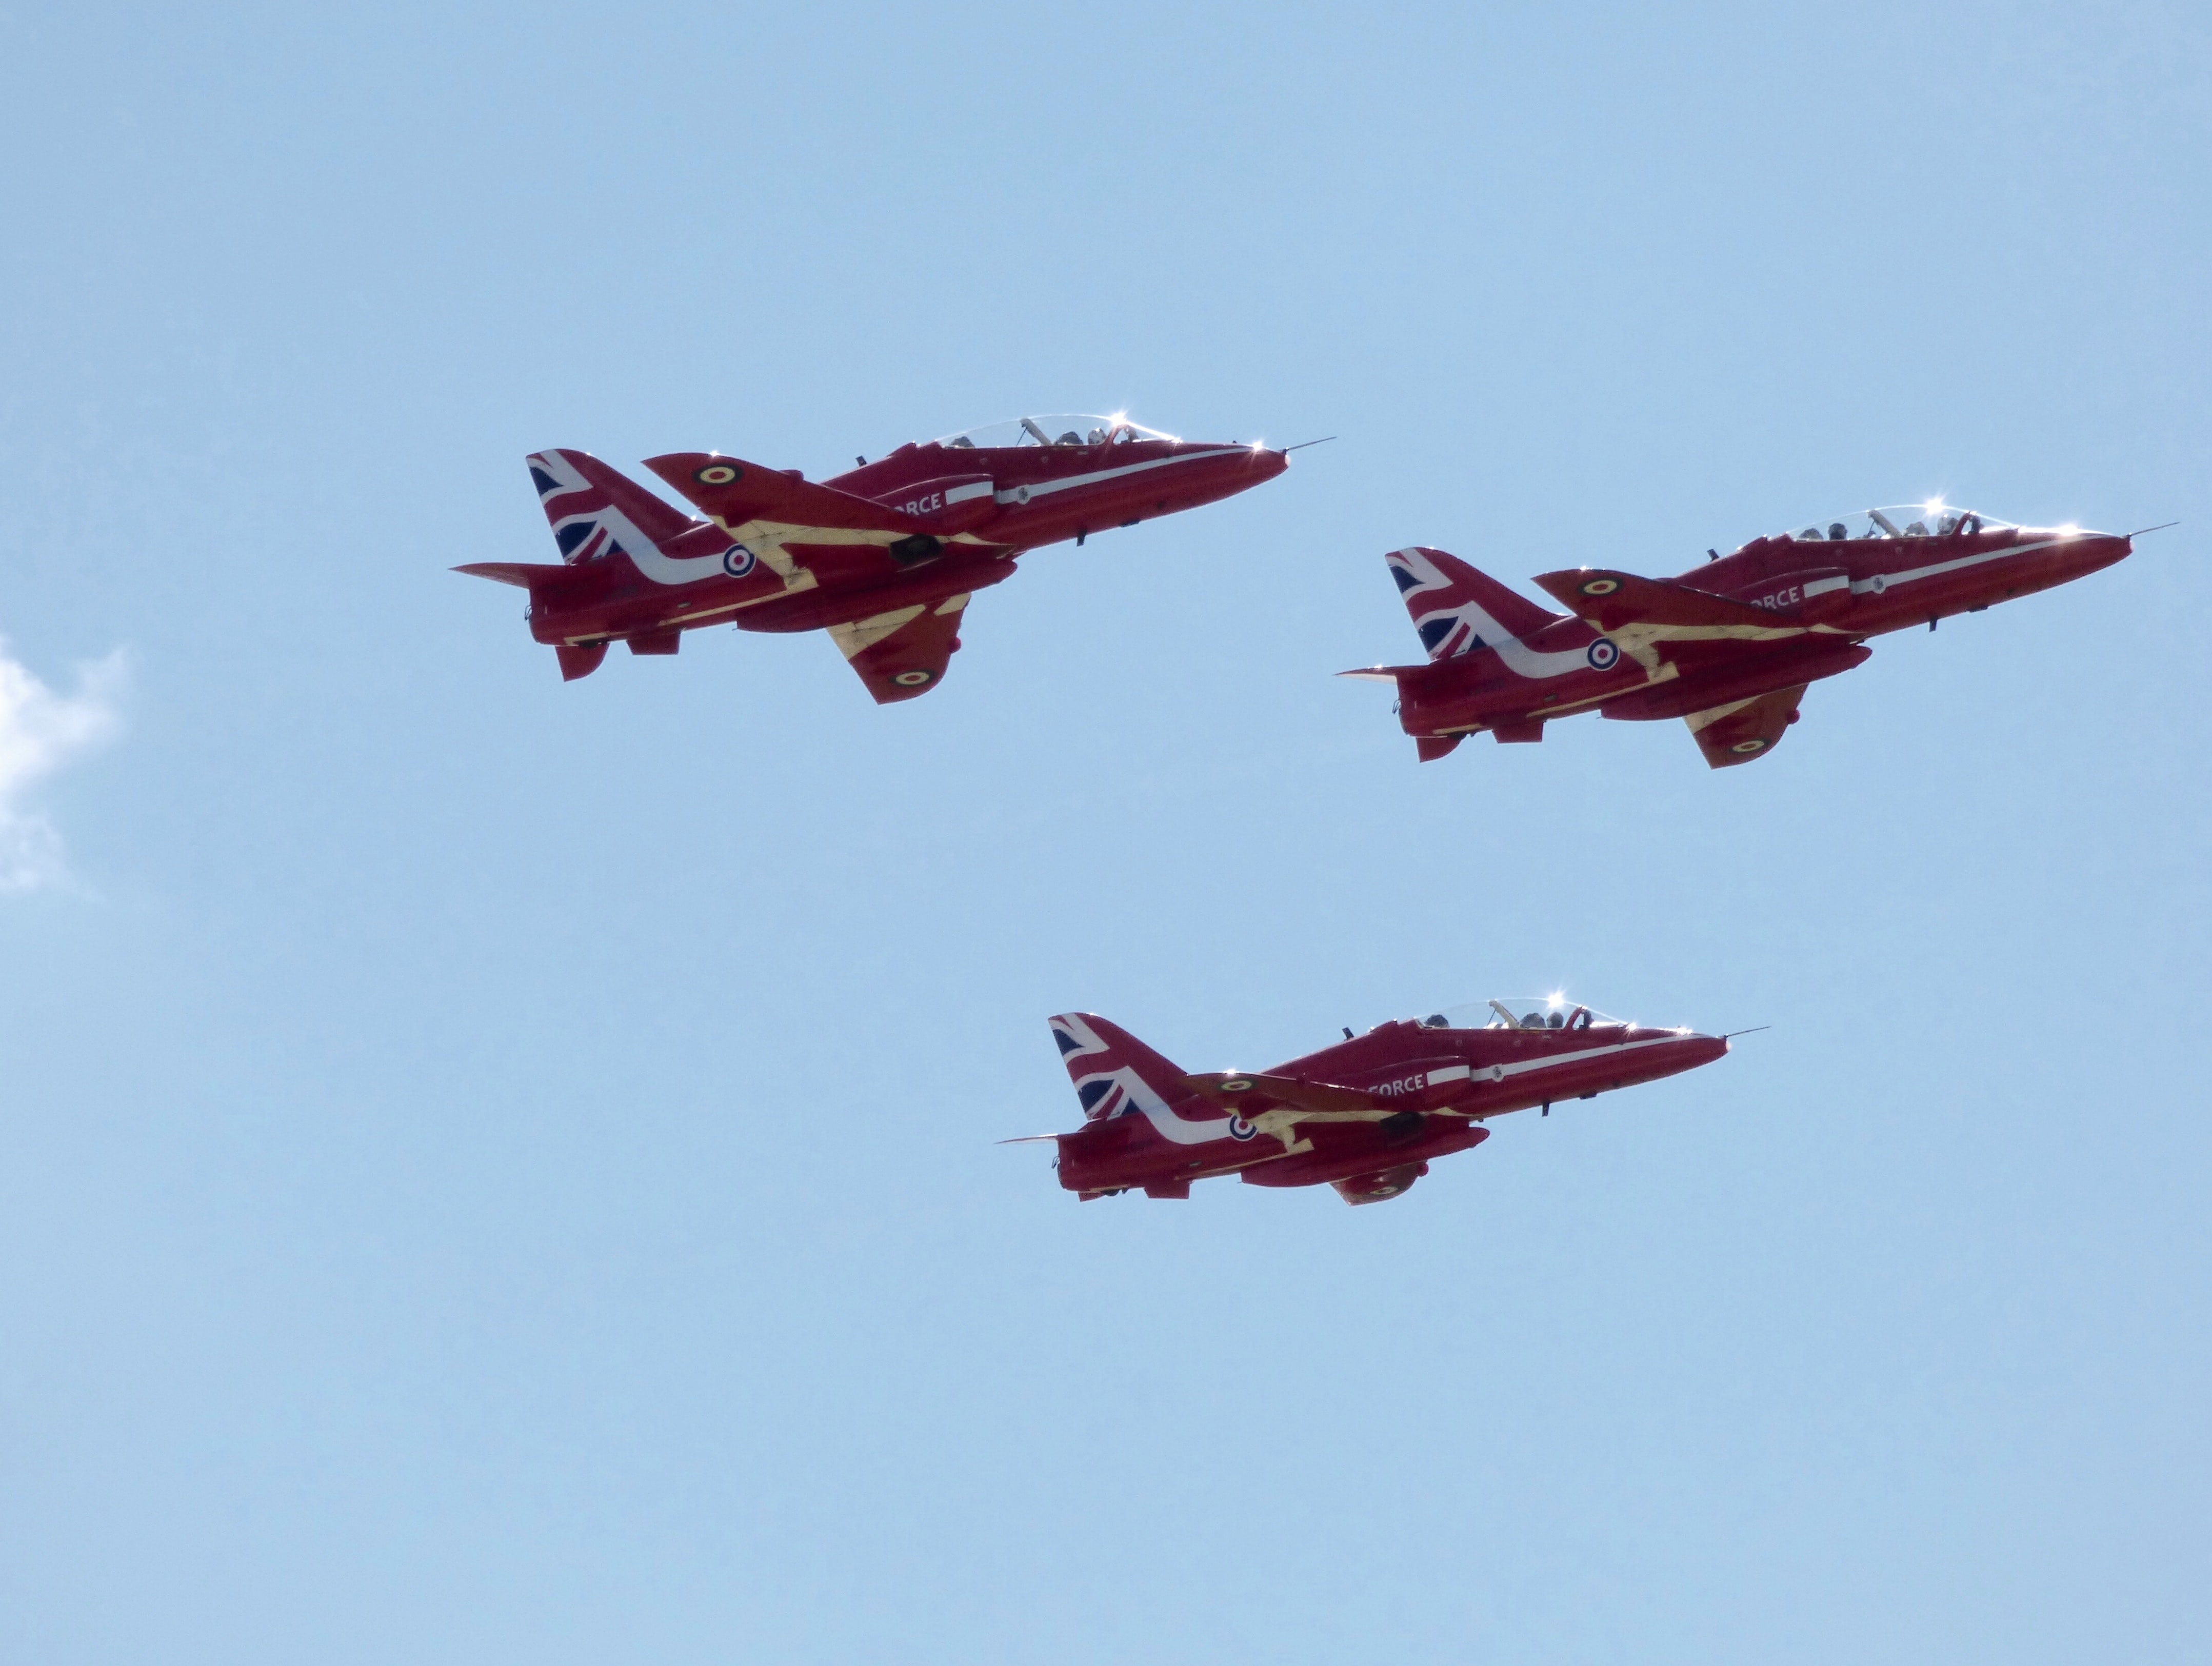 RAF Red Arrows flying in the sky